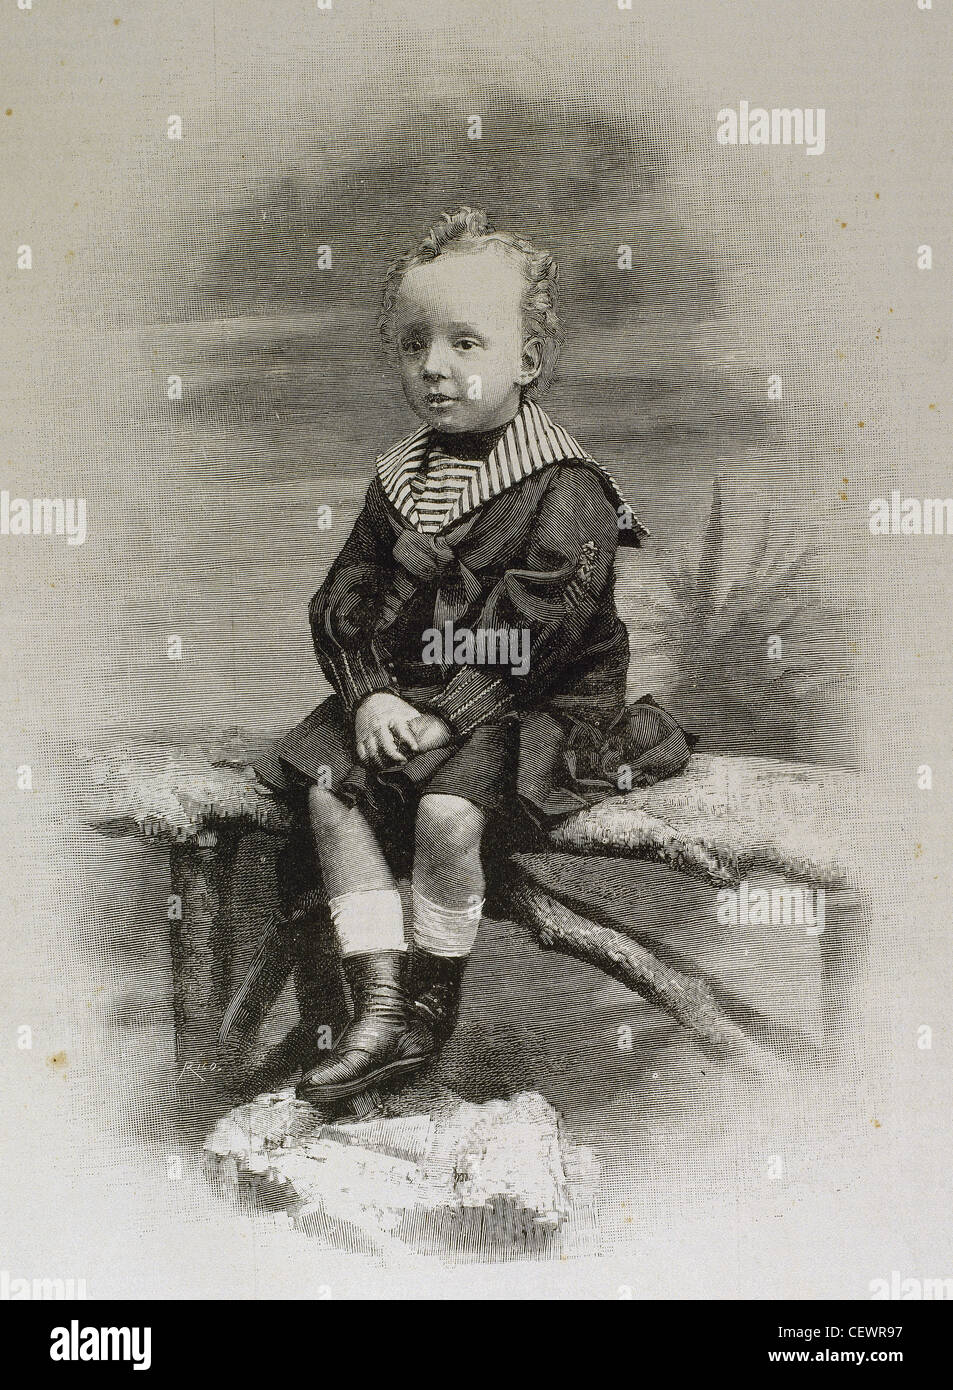 Alphonse XIII (1886-1941). King of Spain. Portrait as a child. Engraving. Stock Photo